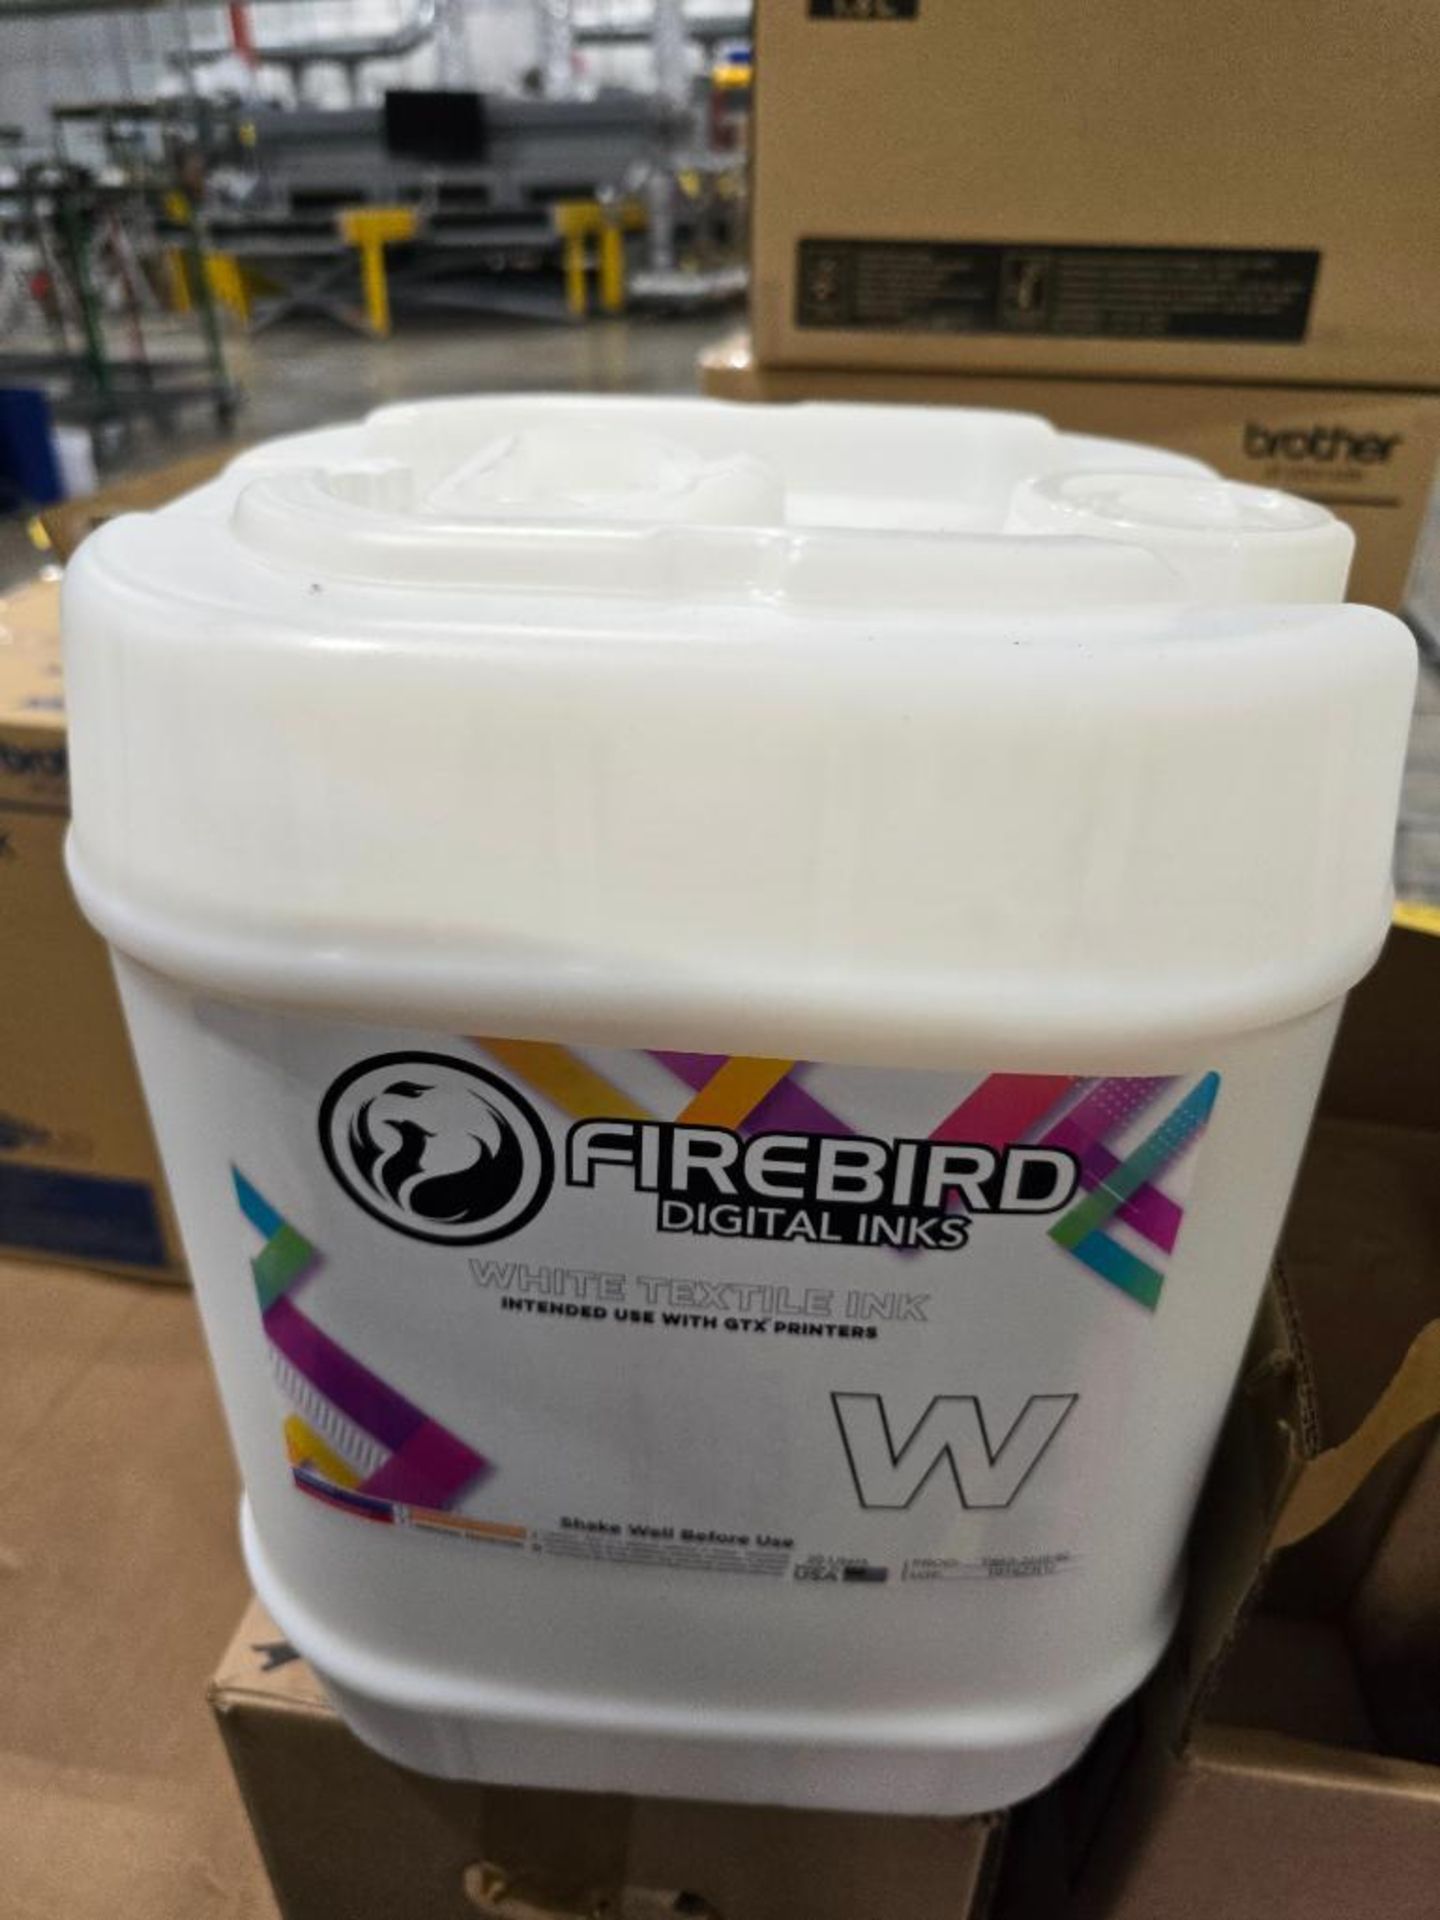 Firebird White Textile Ink, 20-Liter Container, Product: TW(J)-2220-92